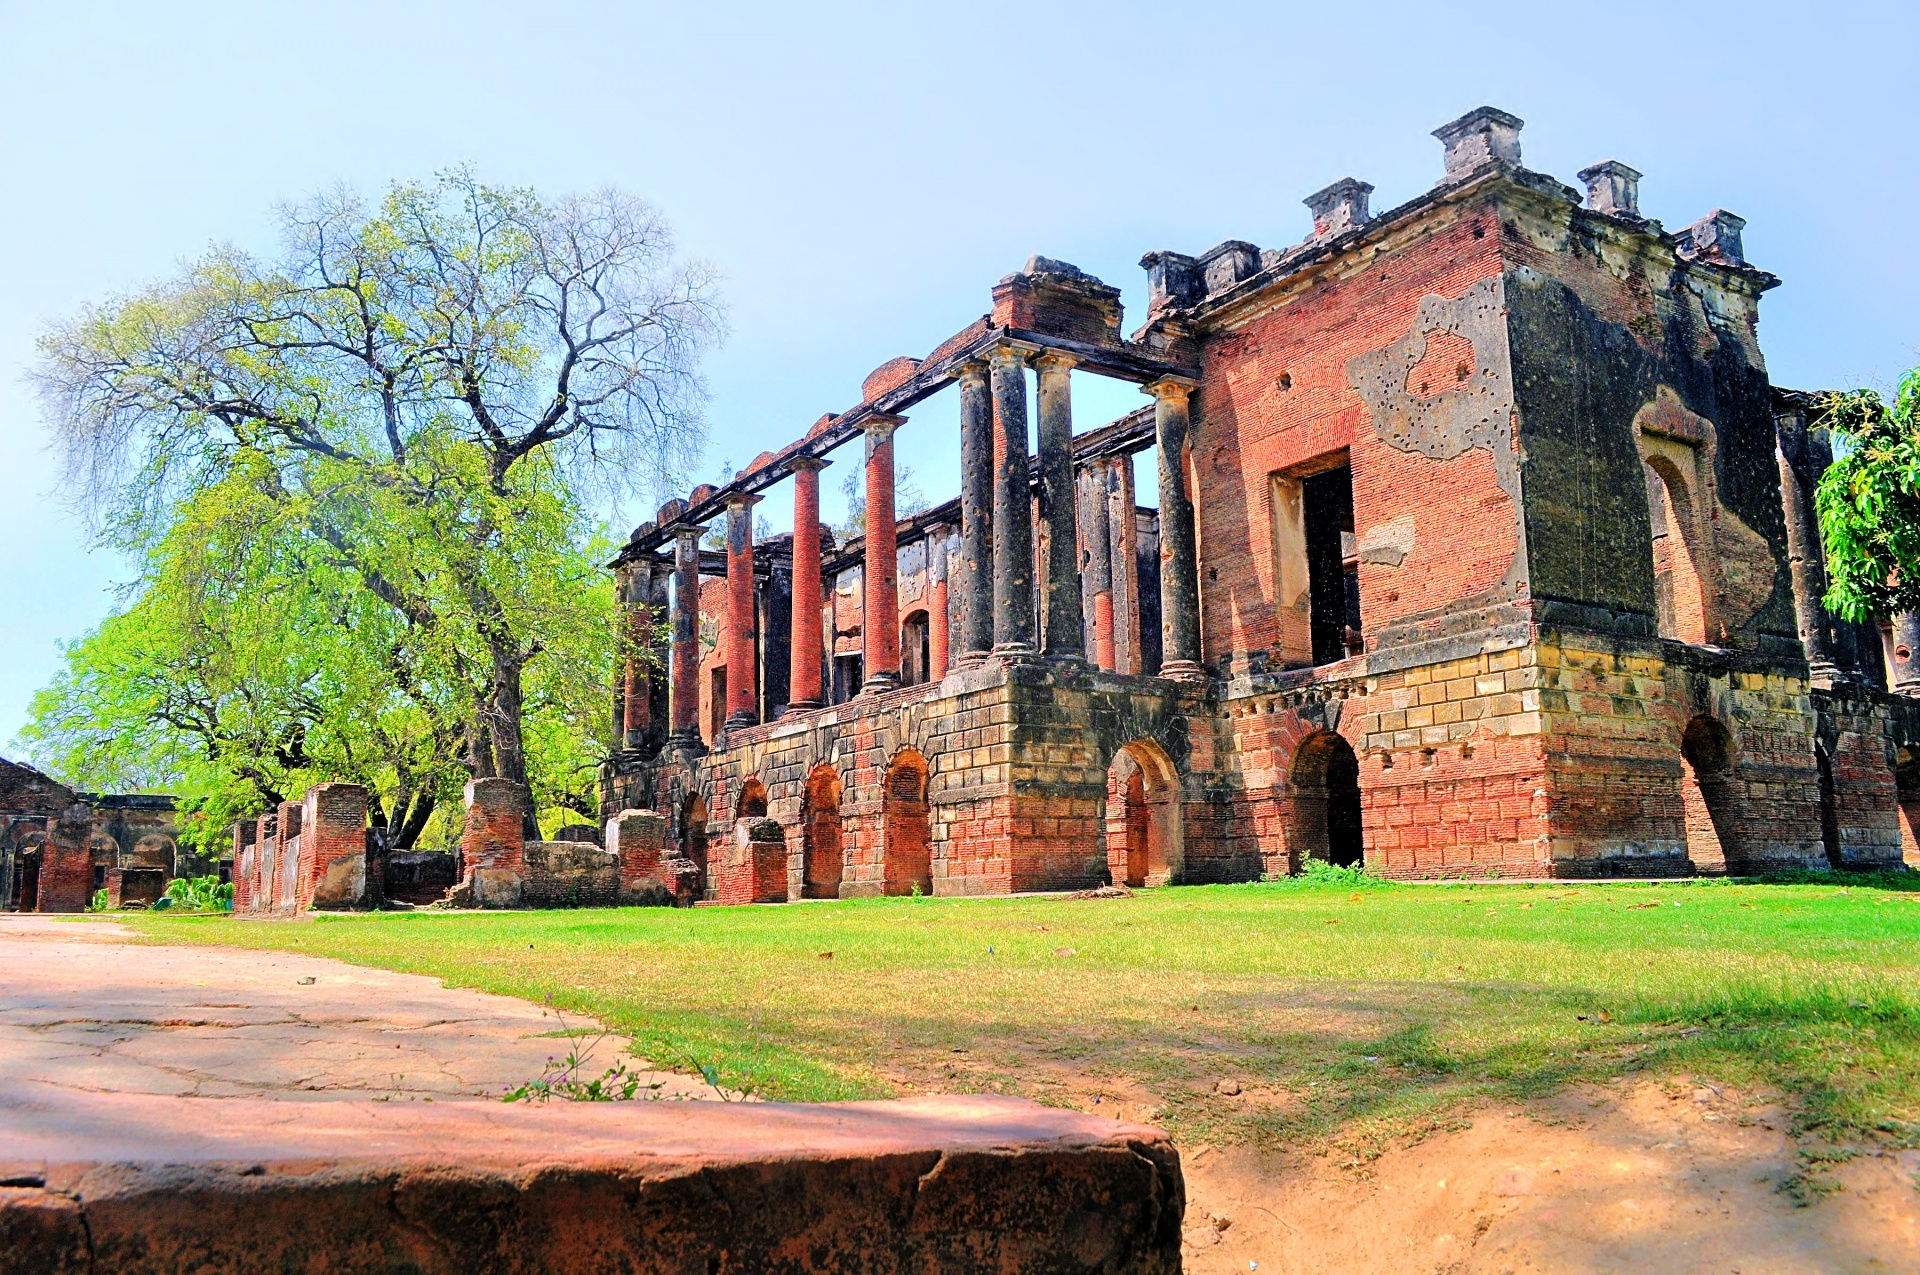 Ruins of 18th century Indian British Residency